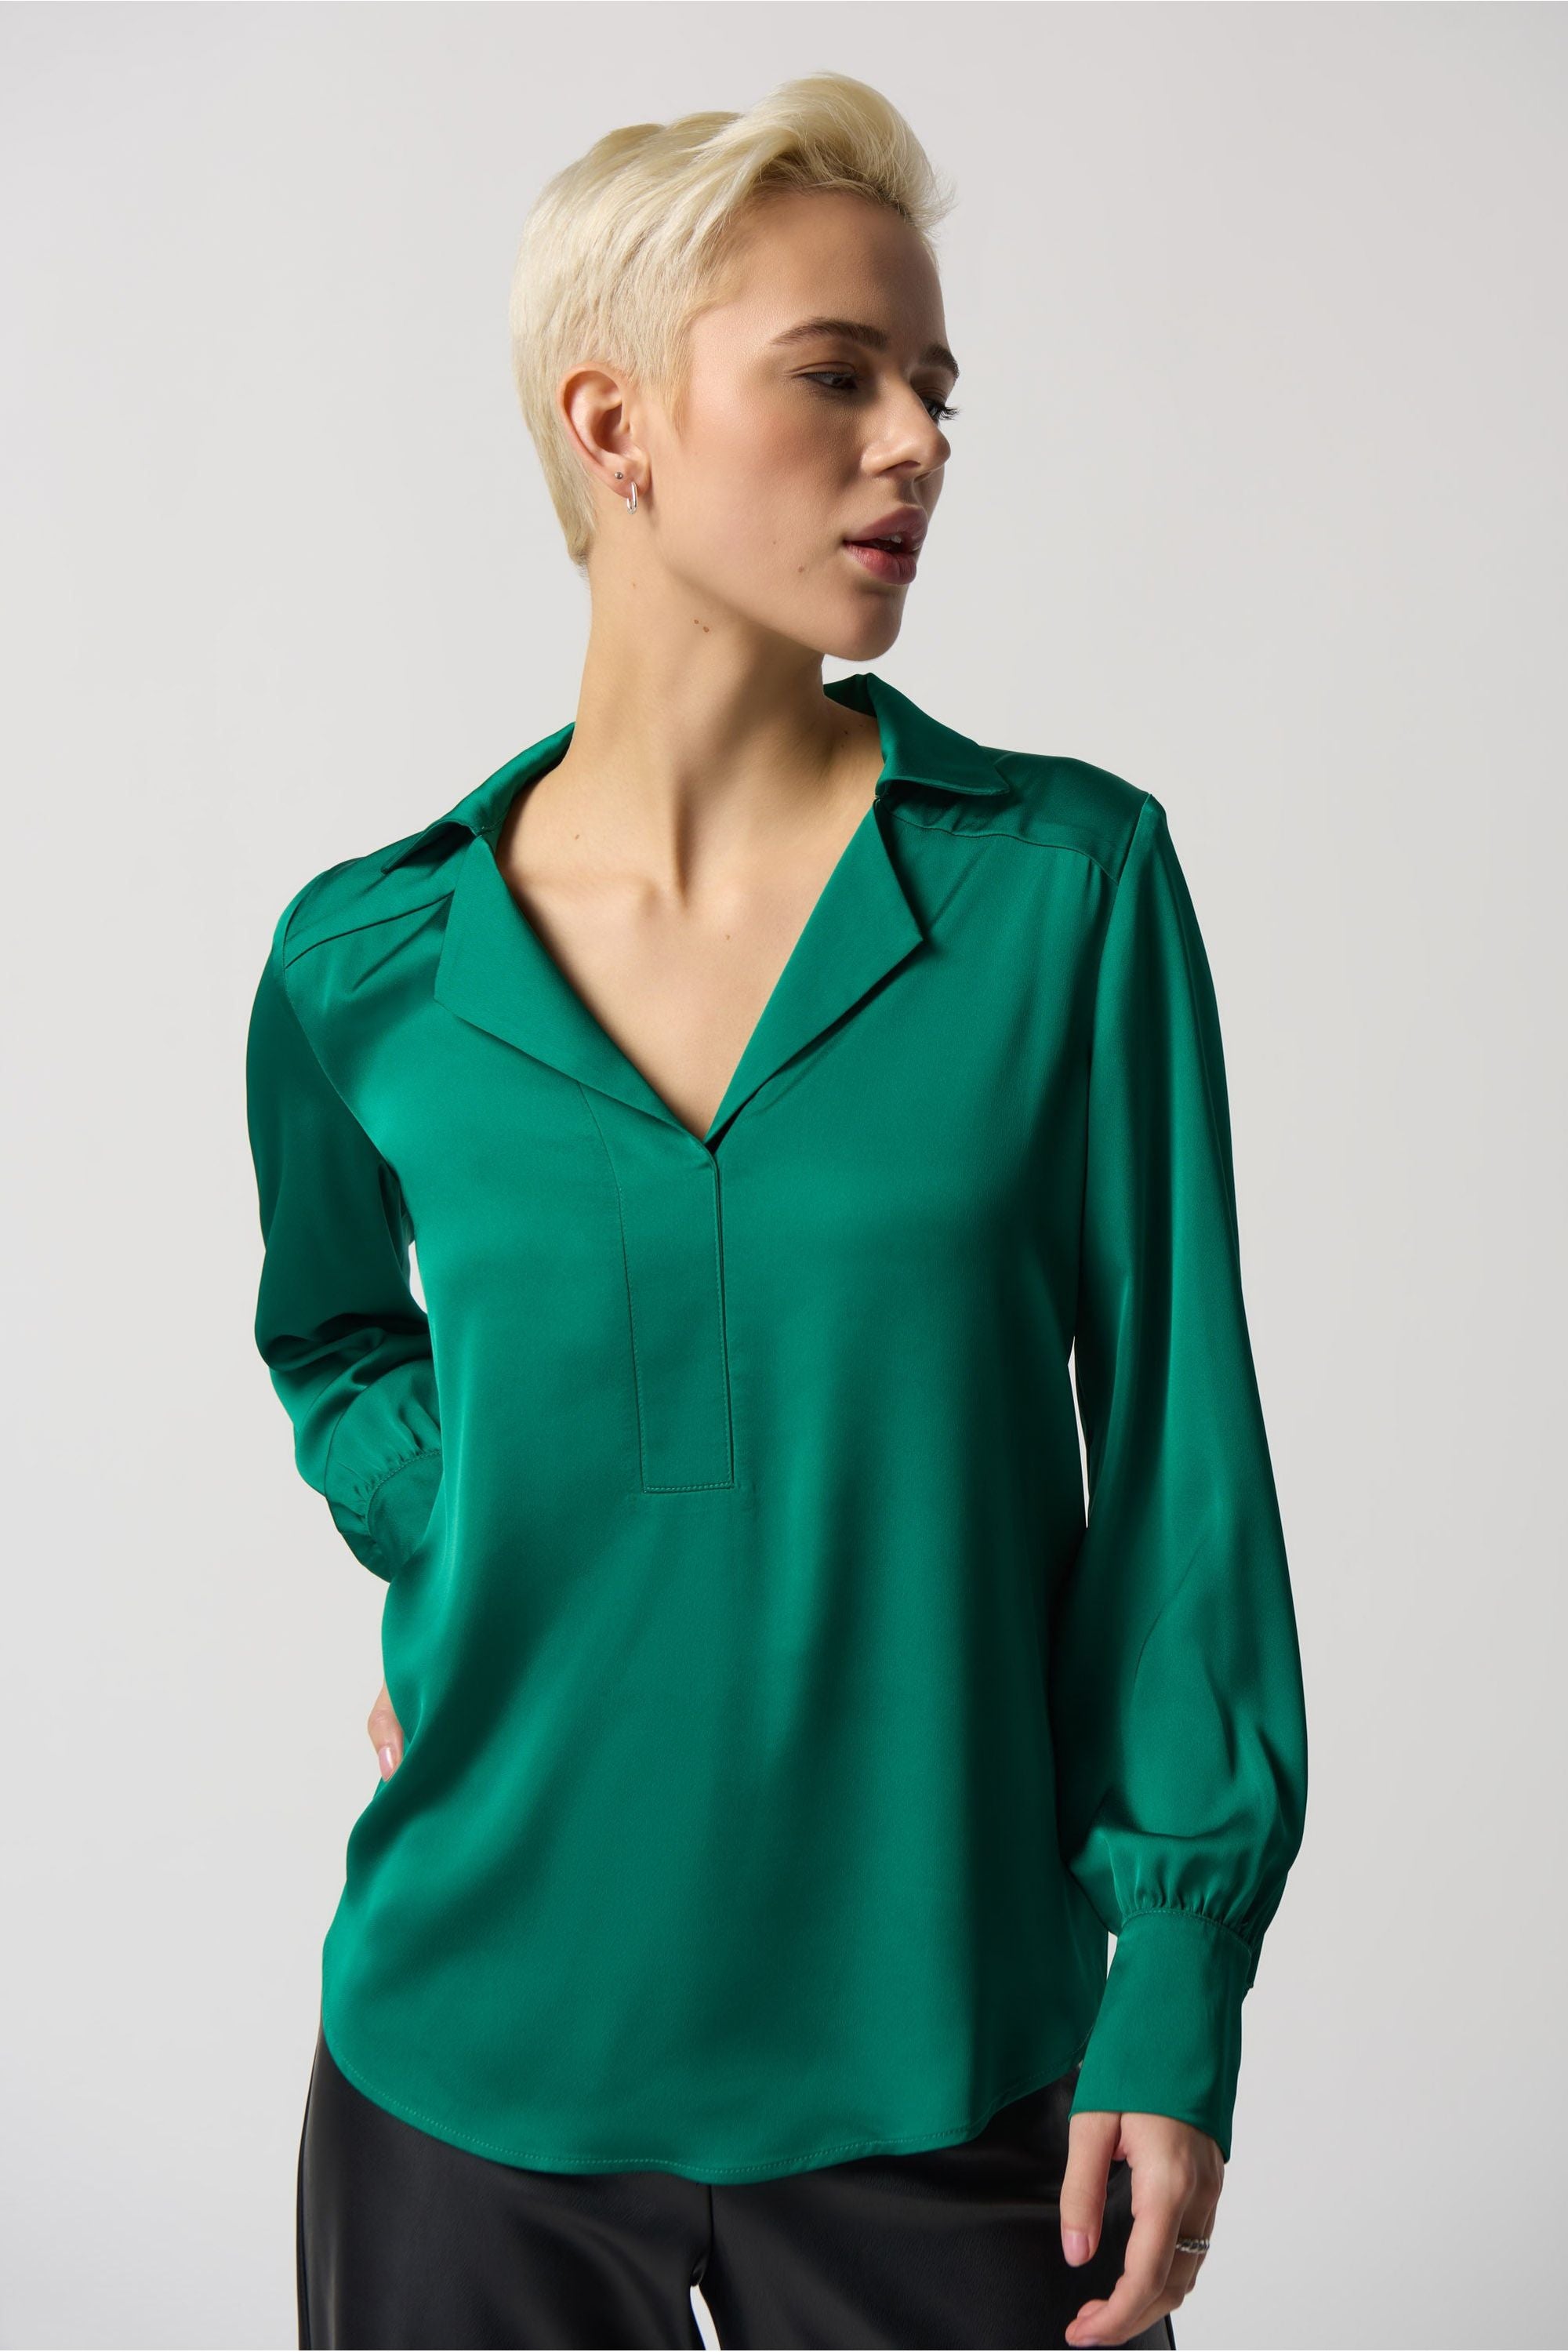 Joseph Ribkoff Notched Collar Satin Blouse - Style 233135, front, kelly green